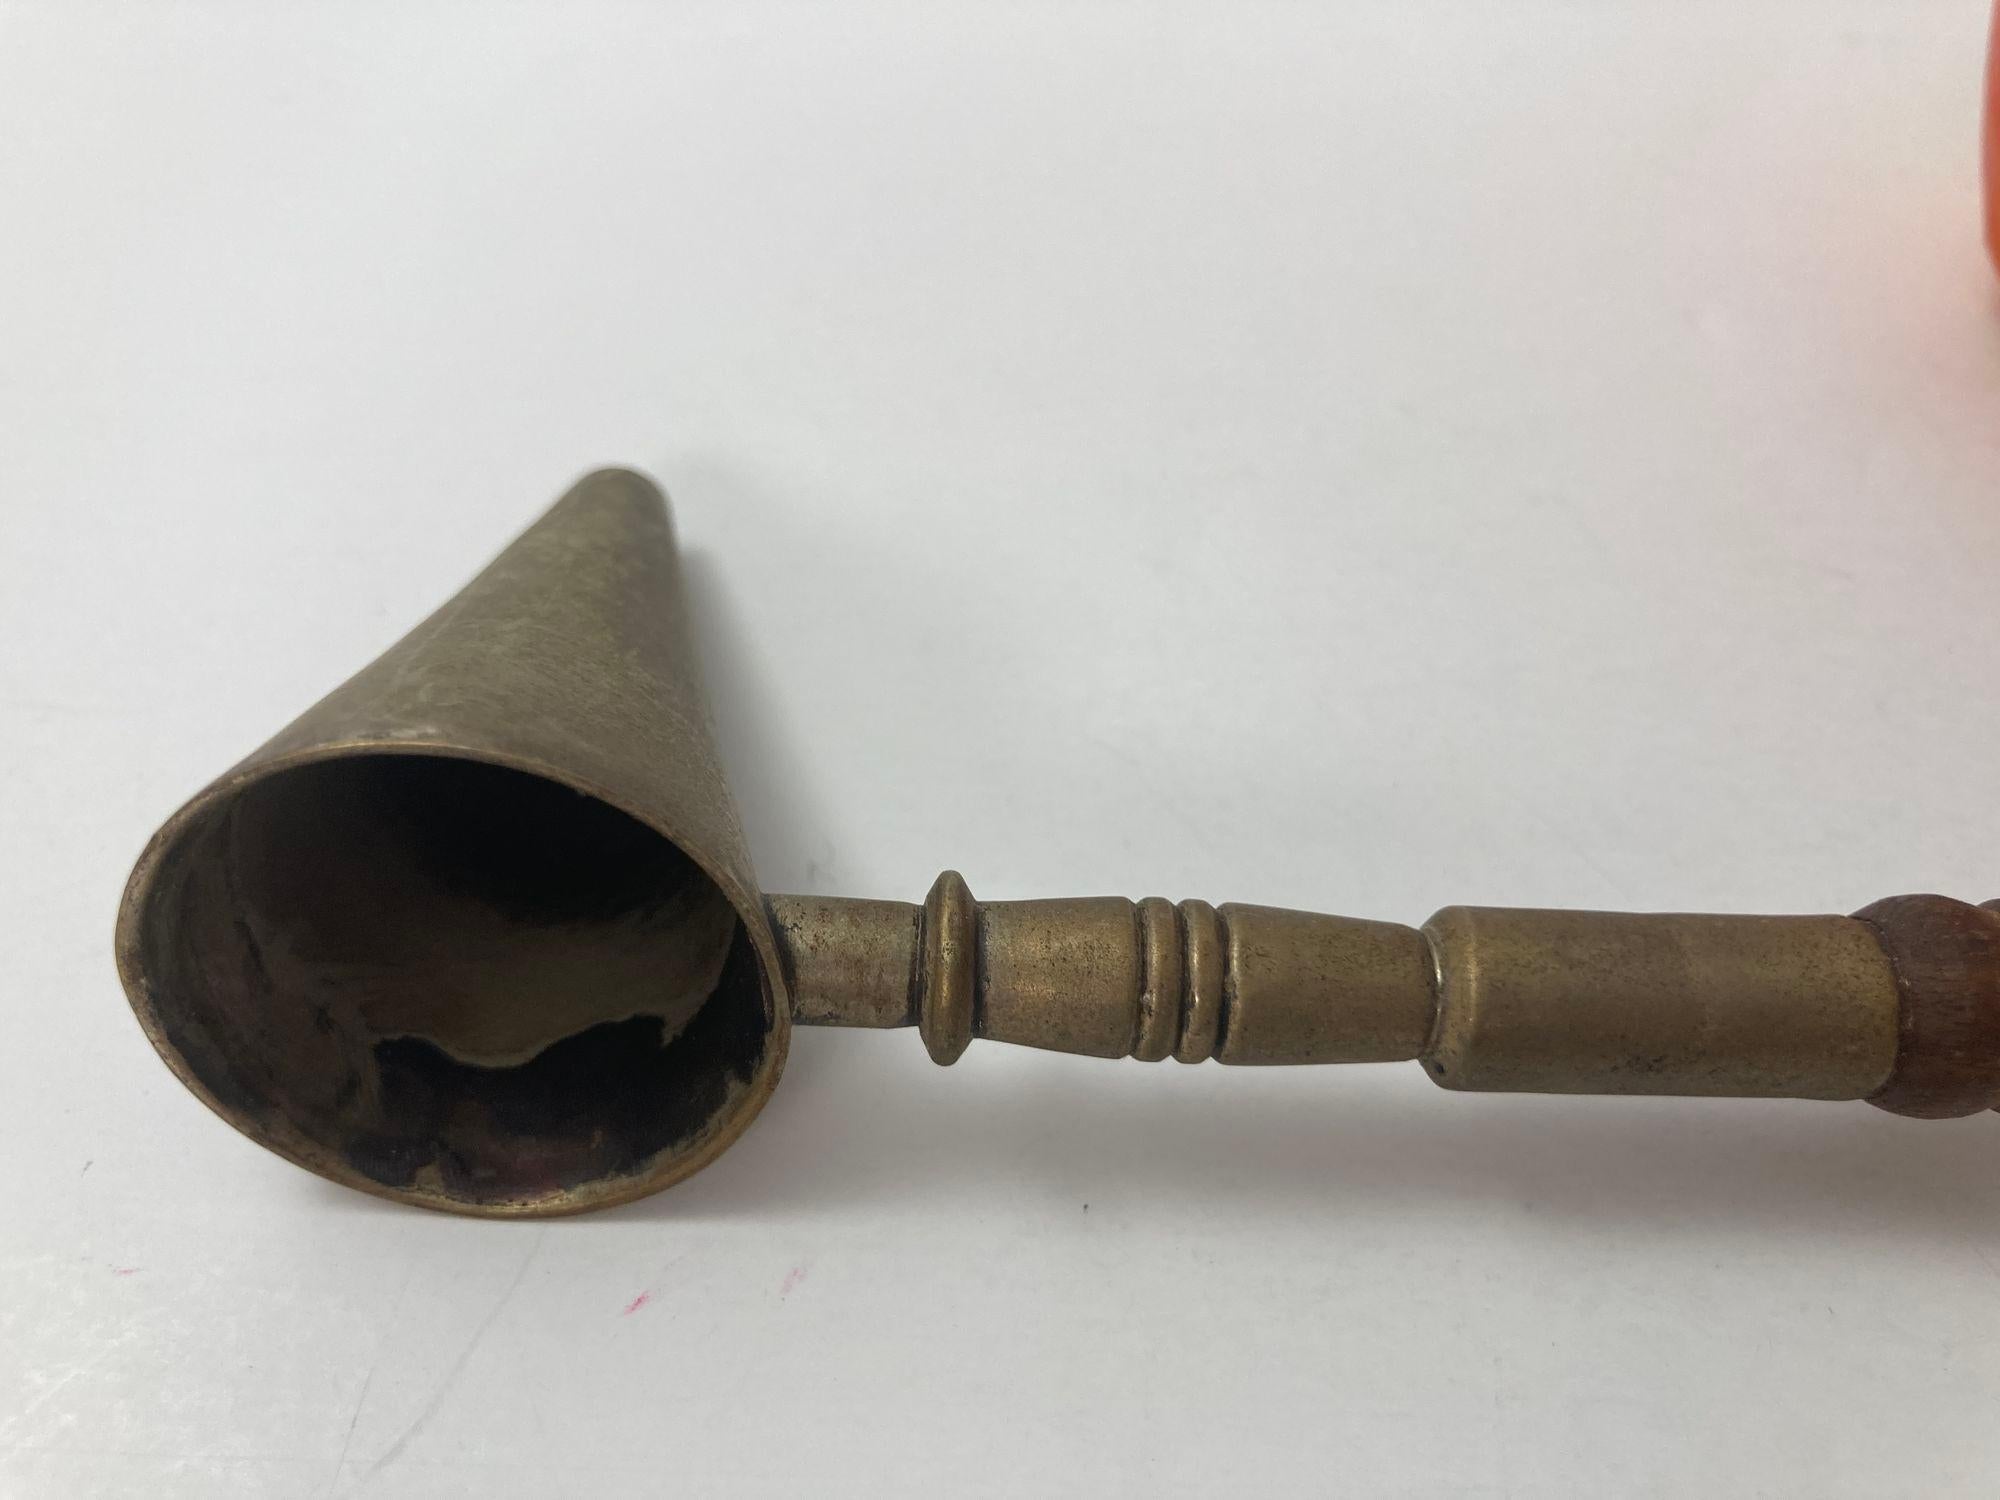 Antique Victorian silver plated and wooden handle candle snuffer.
Candle snuffer with carved wood long and hand carved handle.
Snuffers are great for extinguishing the flames of your tall tapers.
Will also work for votives and multi-wick